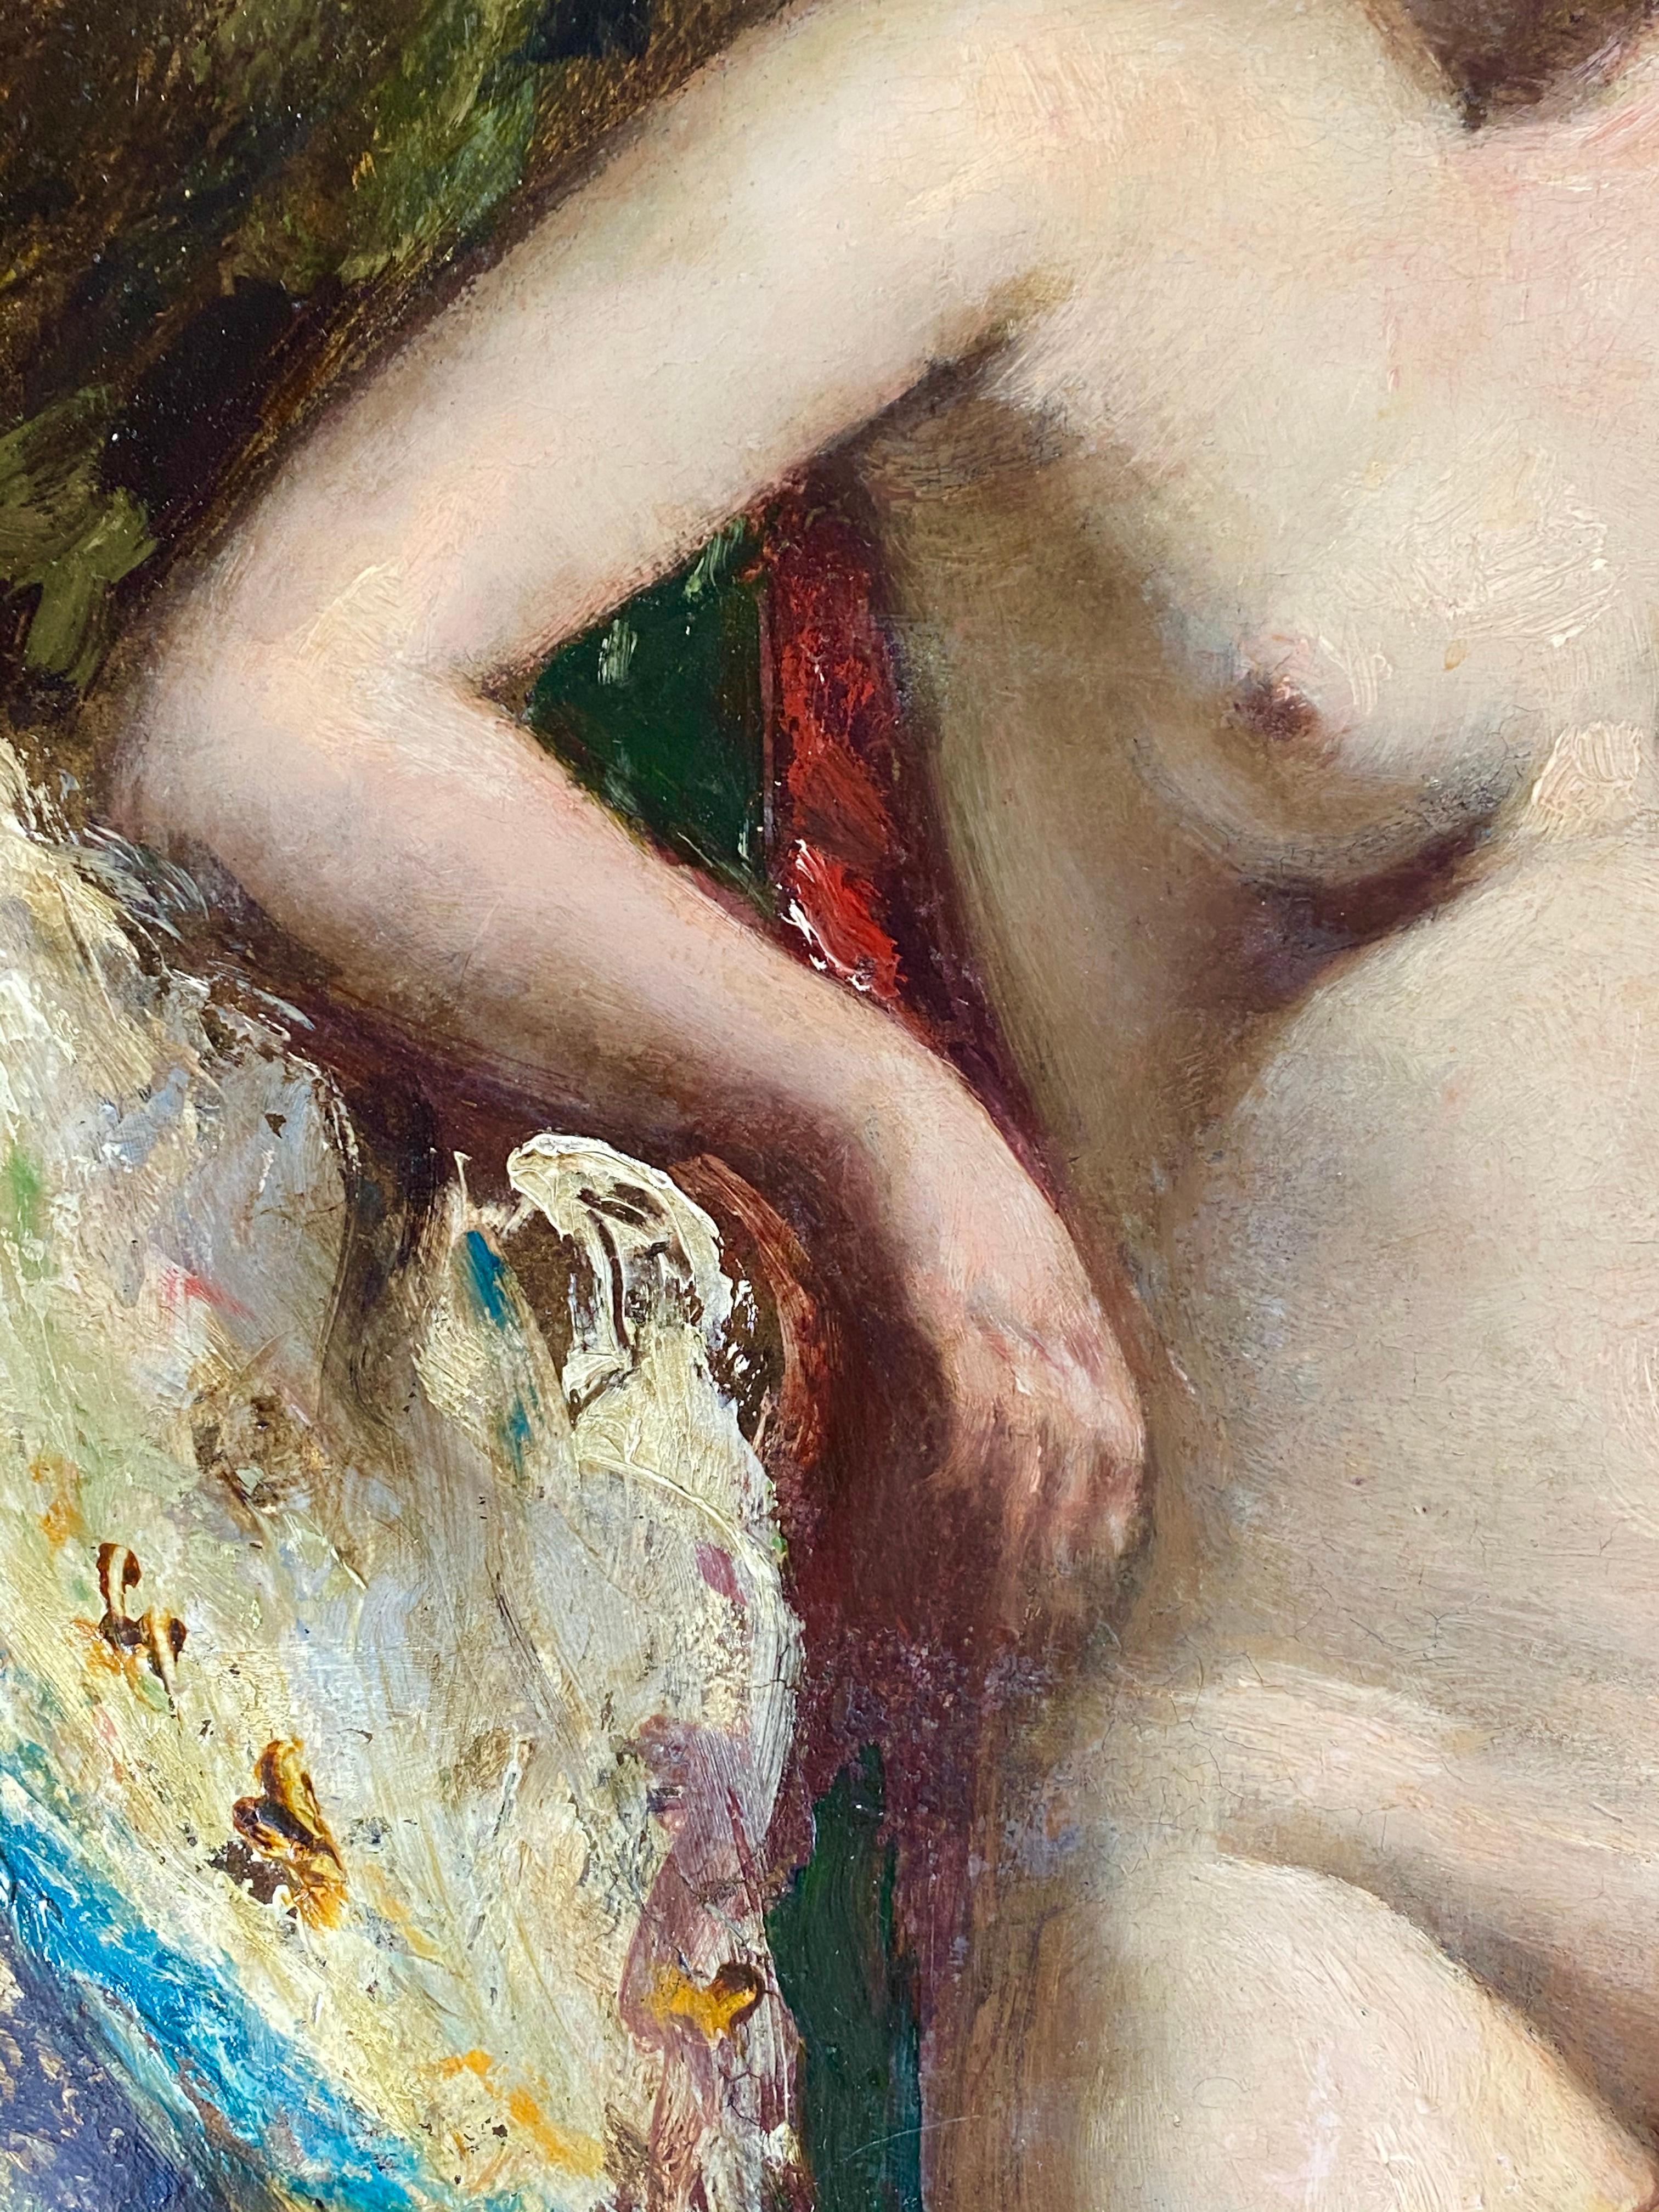 19th Century English Standing Female Nude with Red Drapery  - Old Masters Painting by William Etty R.A.